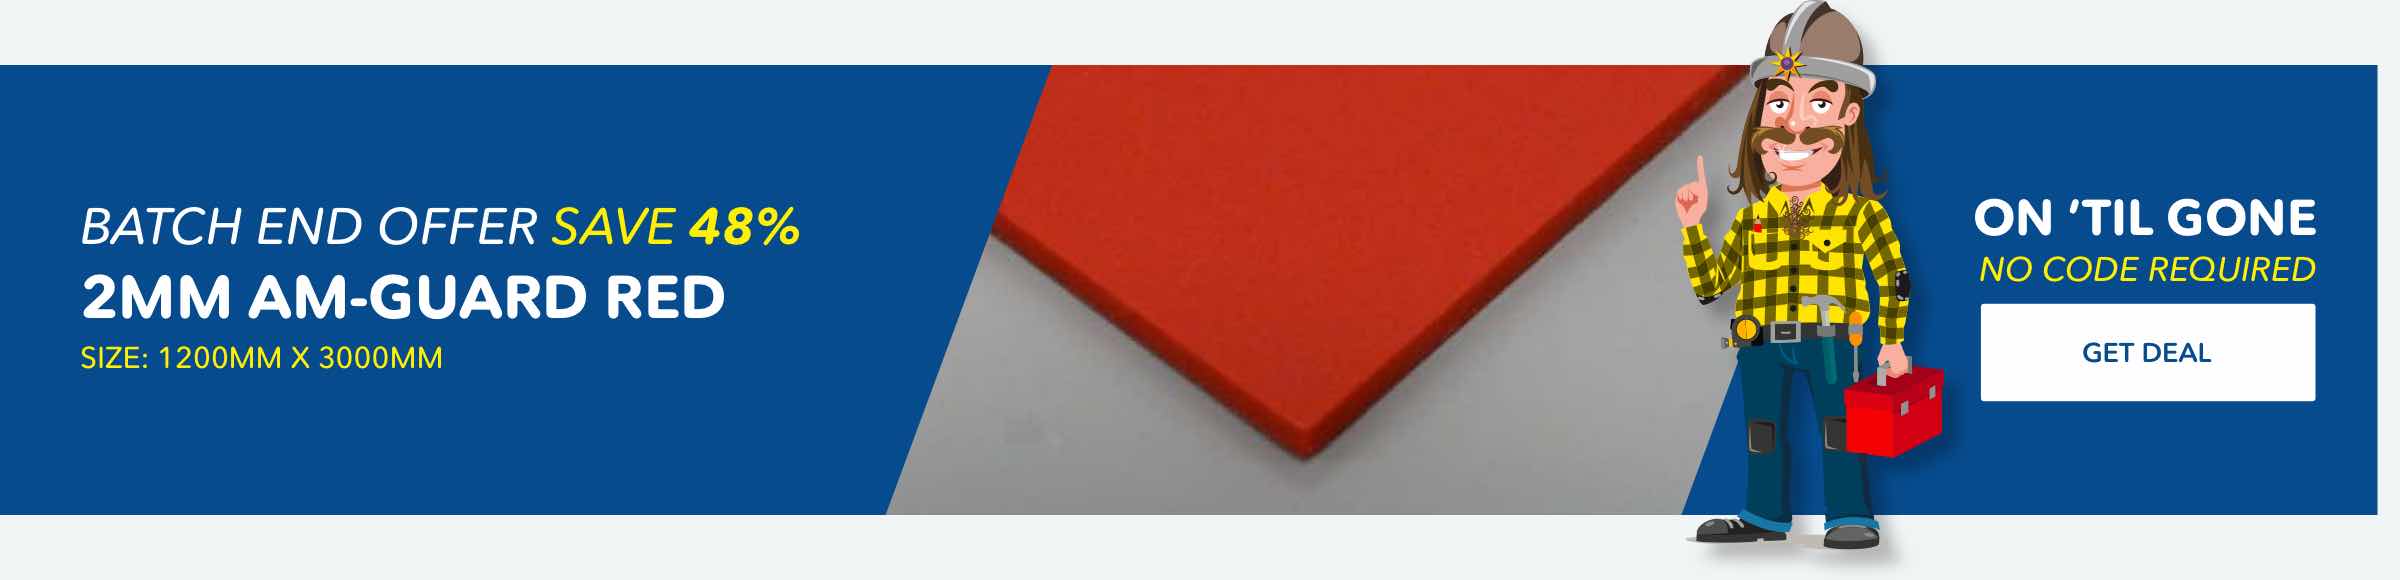 End of line Red 10' PVC sheets. Save 48%.